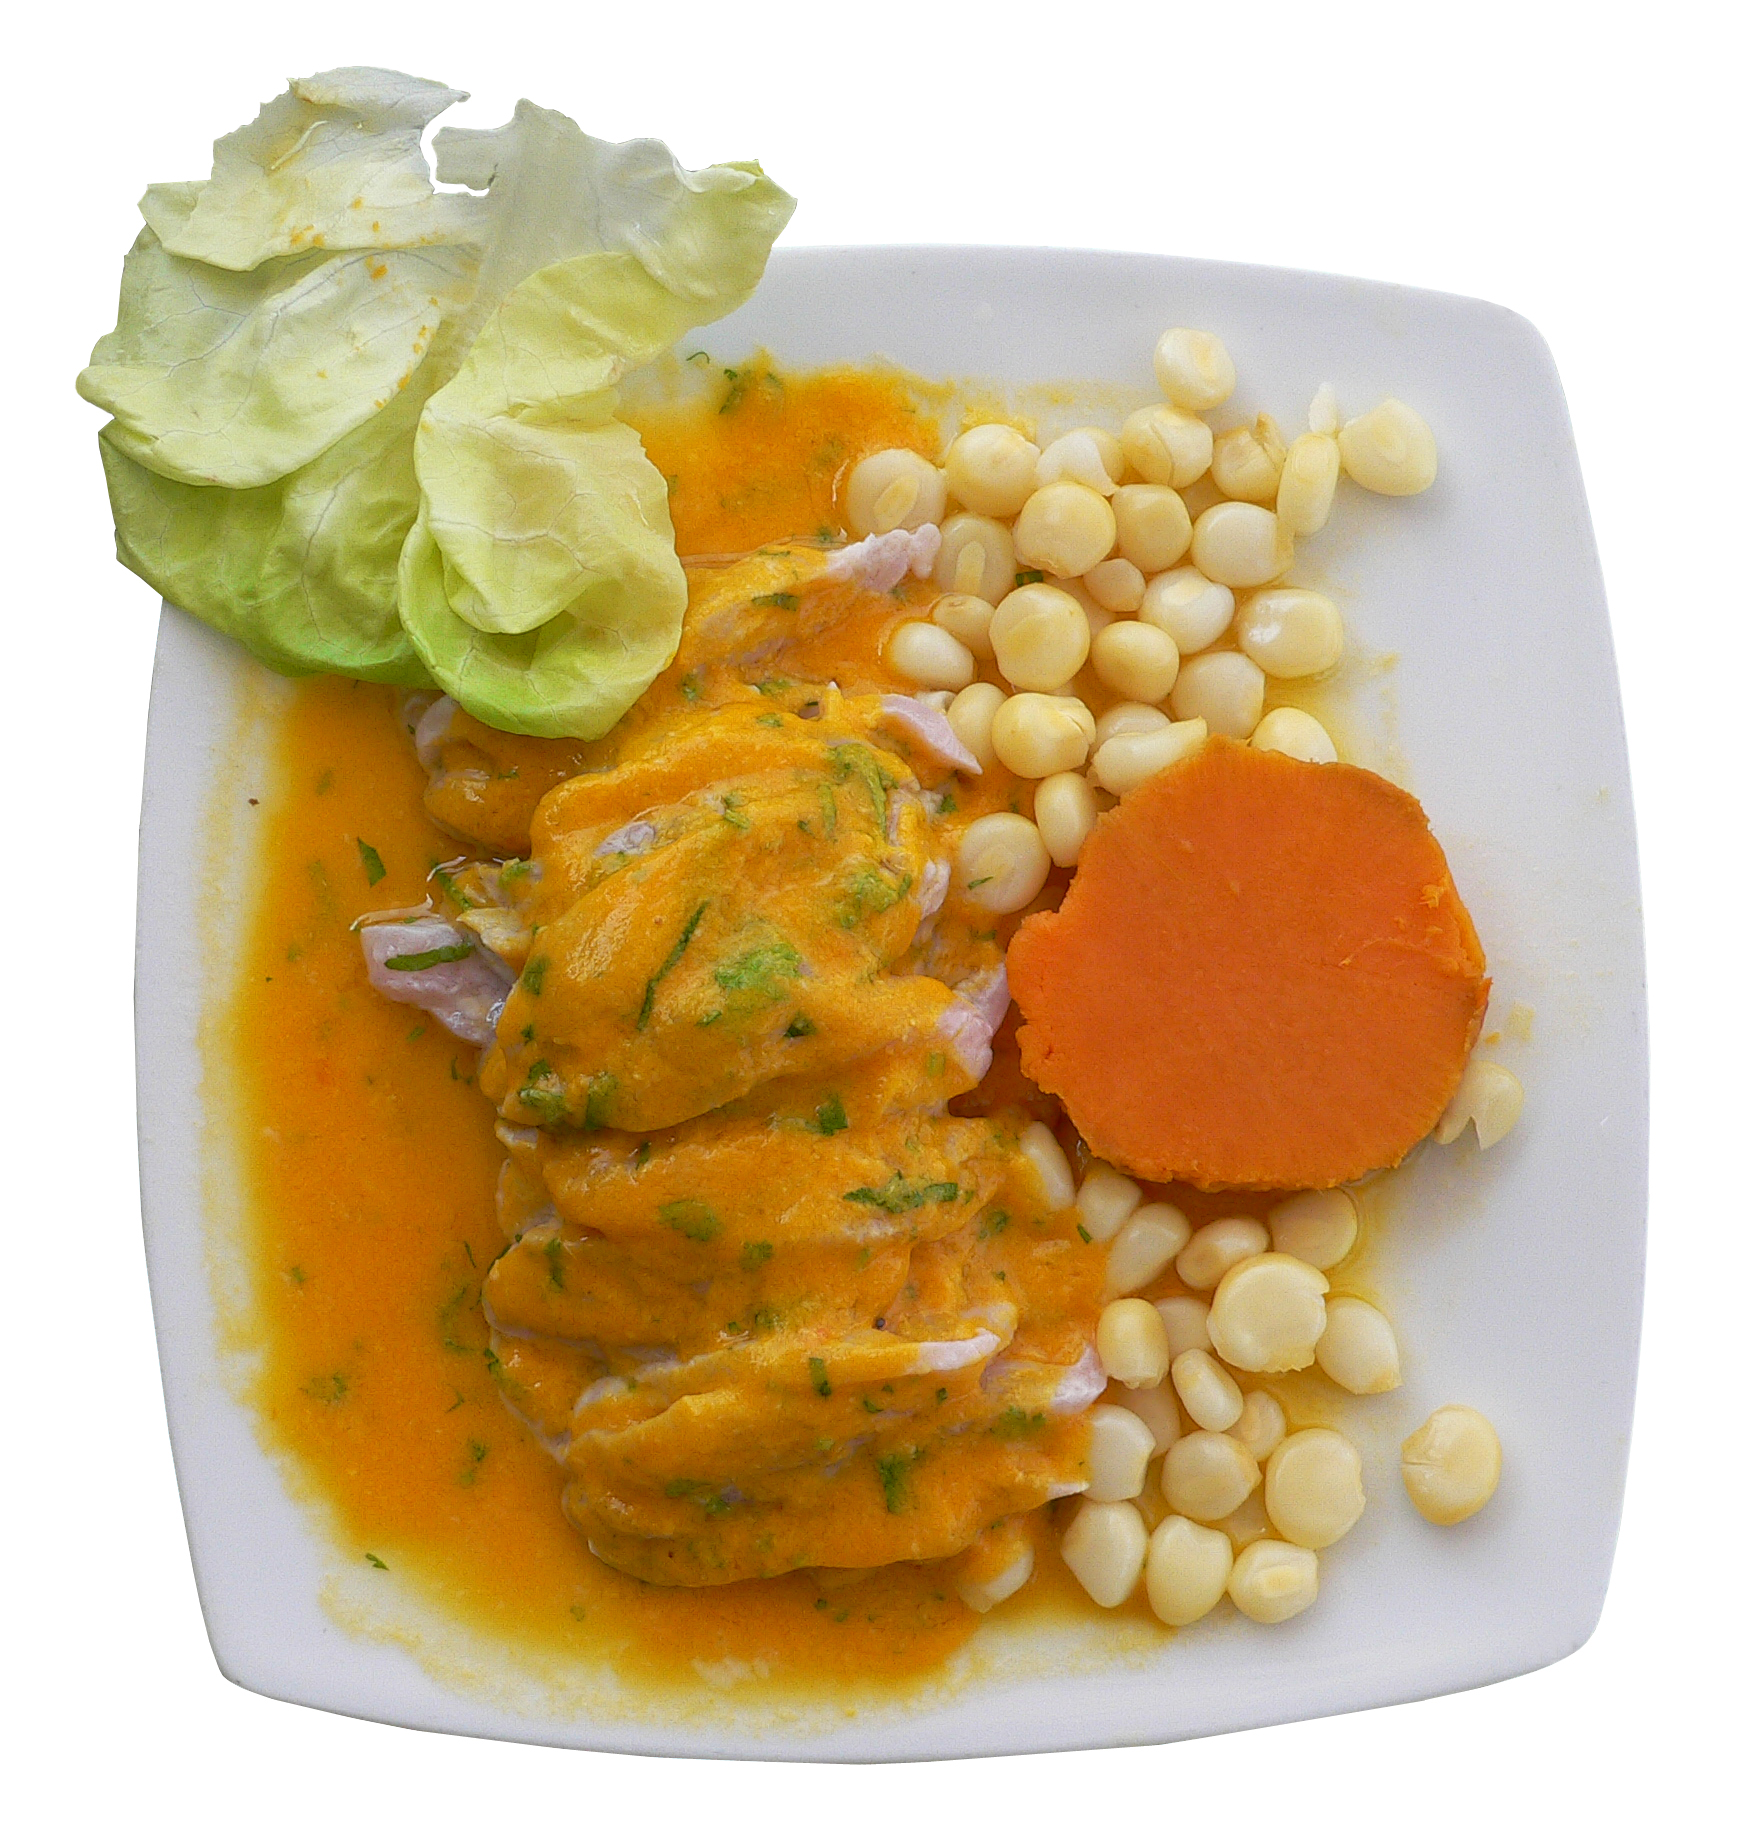 40 Peruvian dishes that you should try before dying